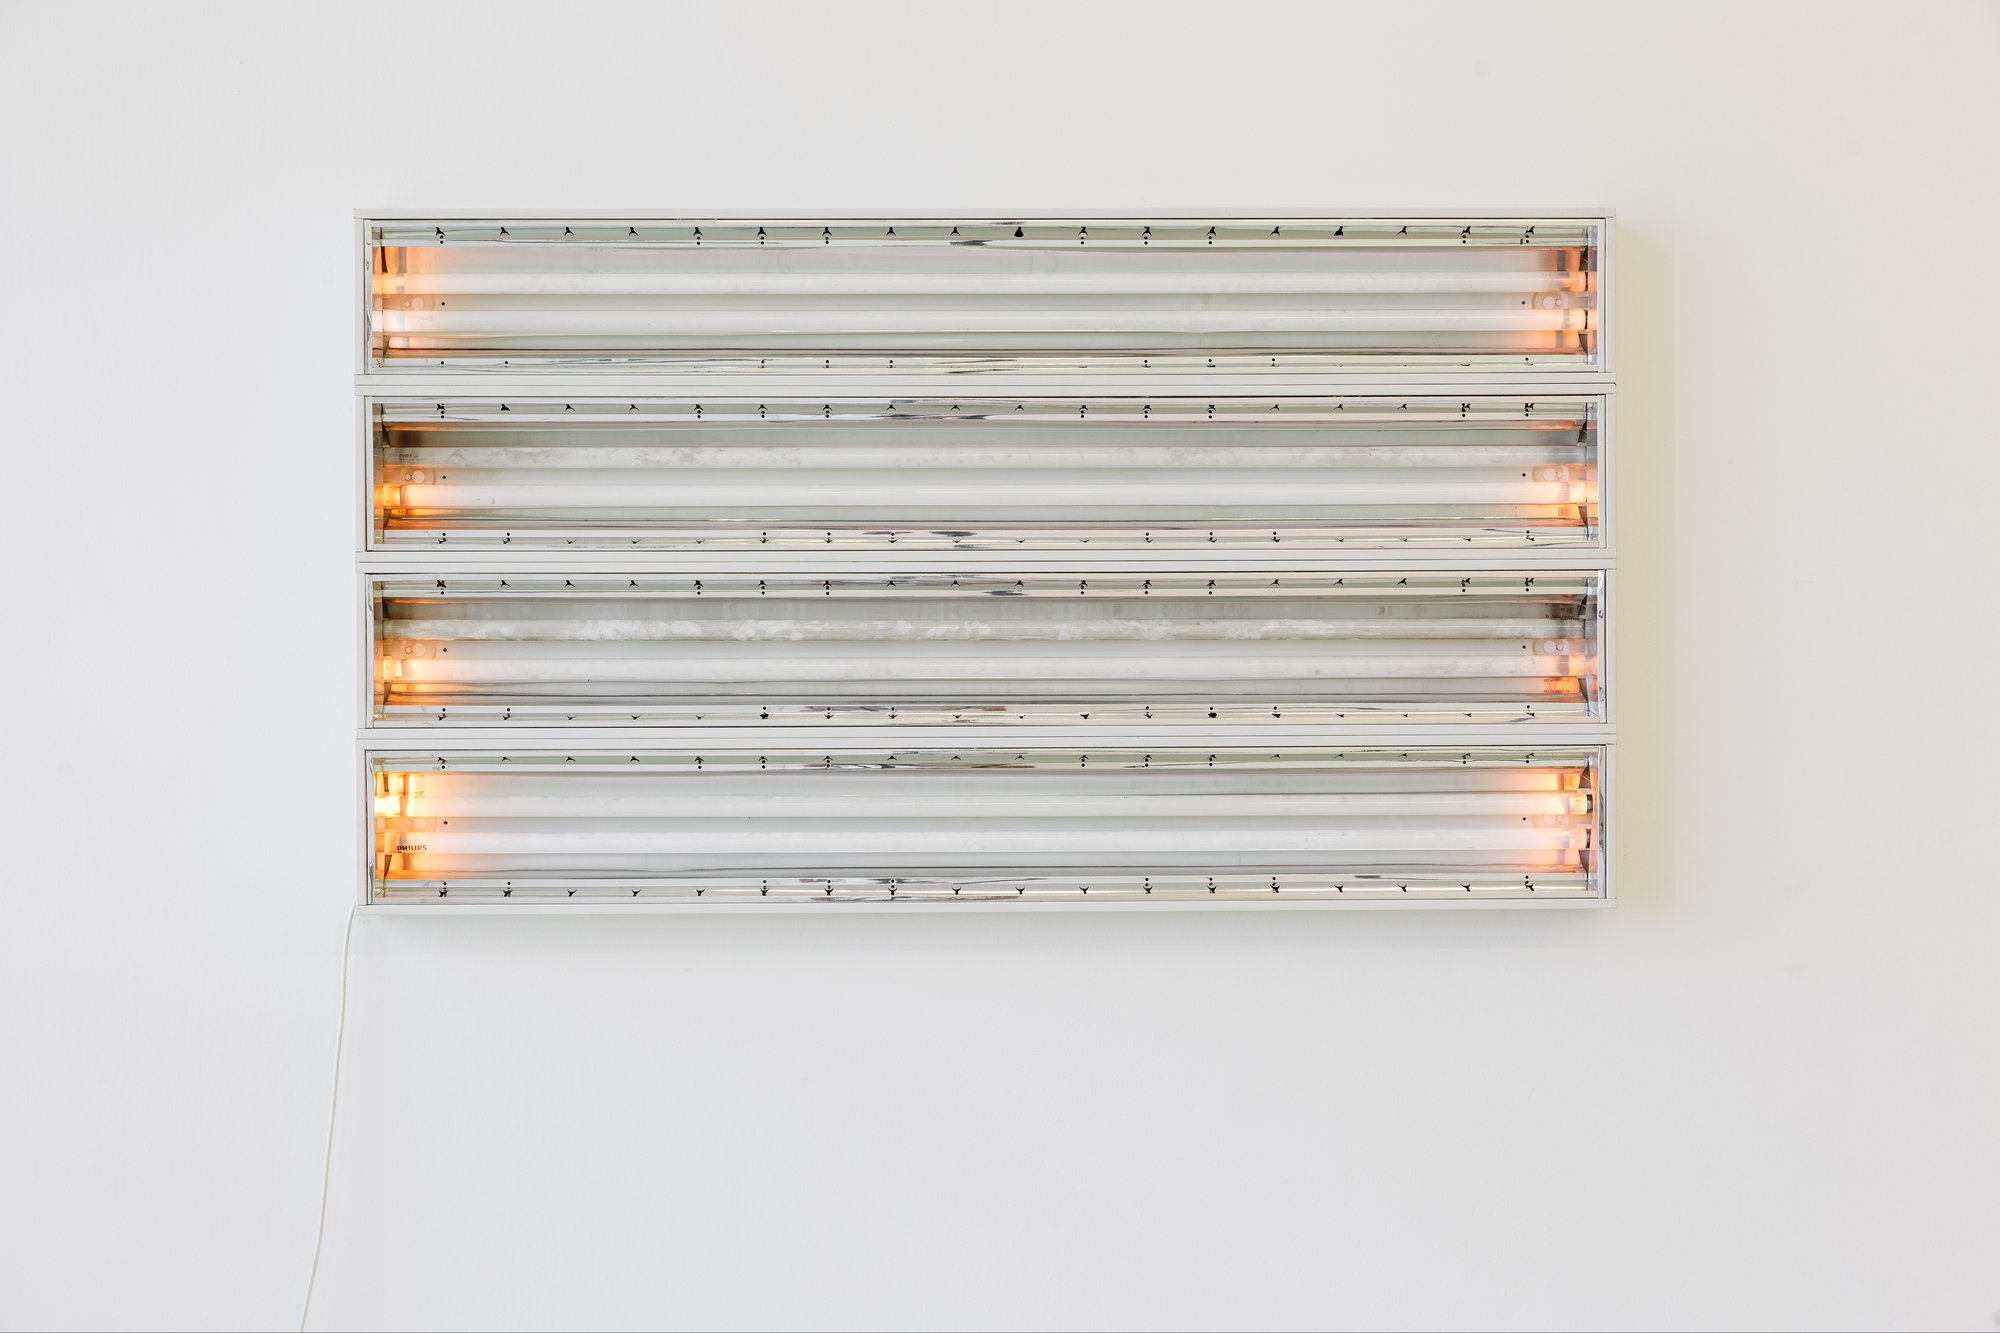 Iris Touliatou, Untitled (Still not over you), ceiling light fixtures, aluminium frame, fluorescents, wires, cable, 153 x 21 x 9 cm each, 2021. Installation view, Anti-Structure, DESTE Foundation, Athens, 2021